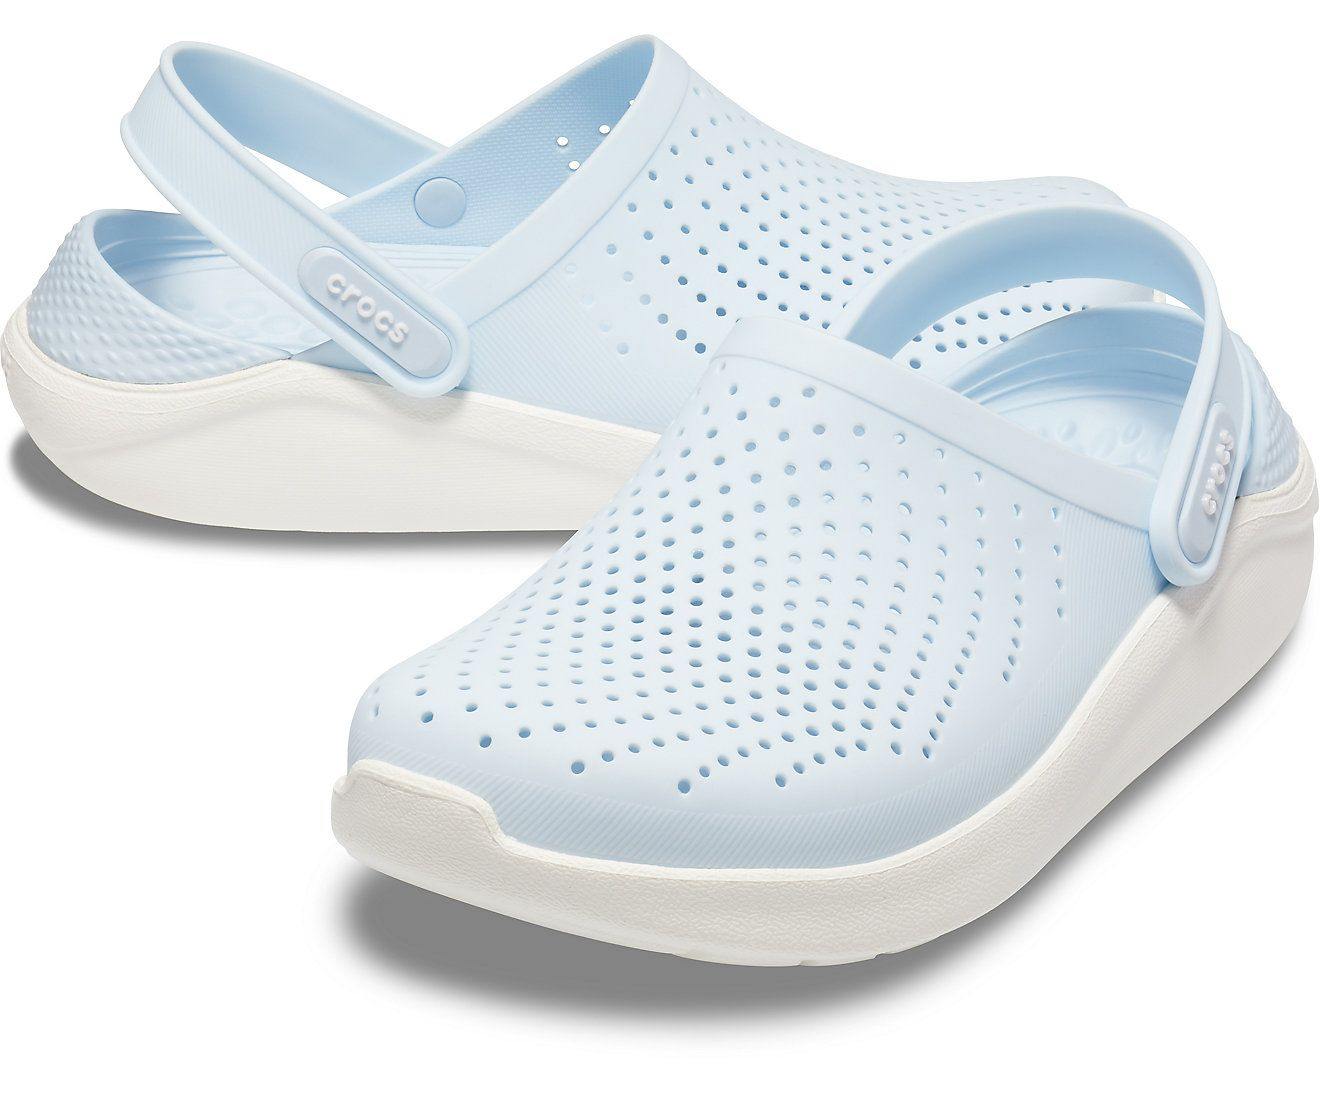 Crocs LiteRide™ Clog, Most Comfortable Shoes for Men and Women ...